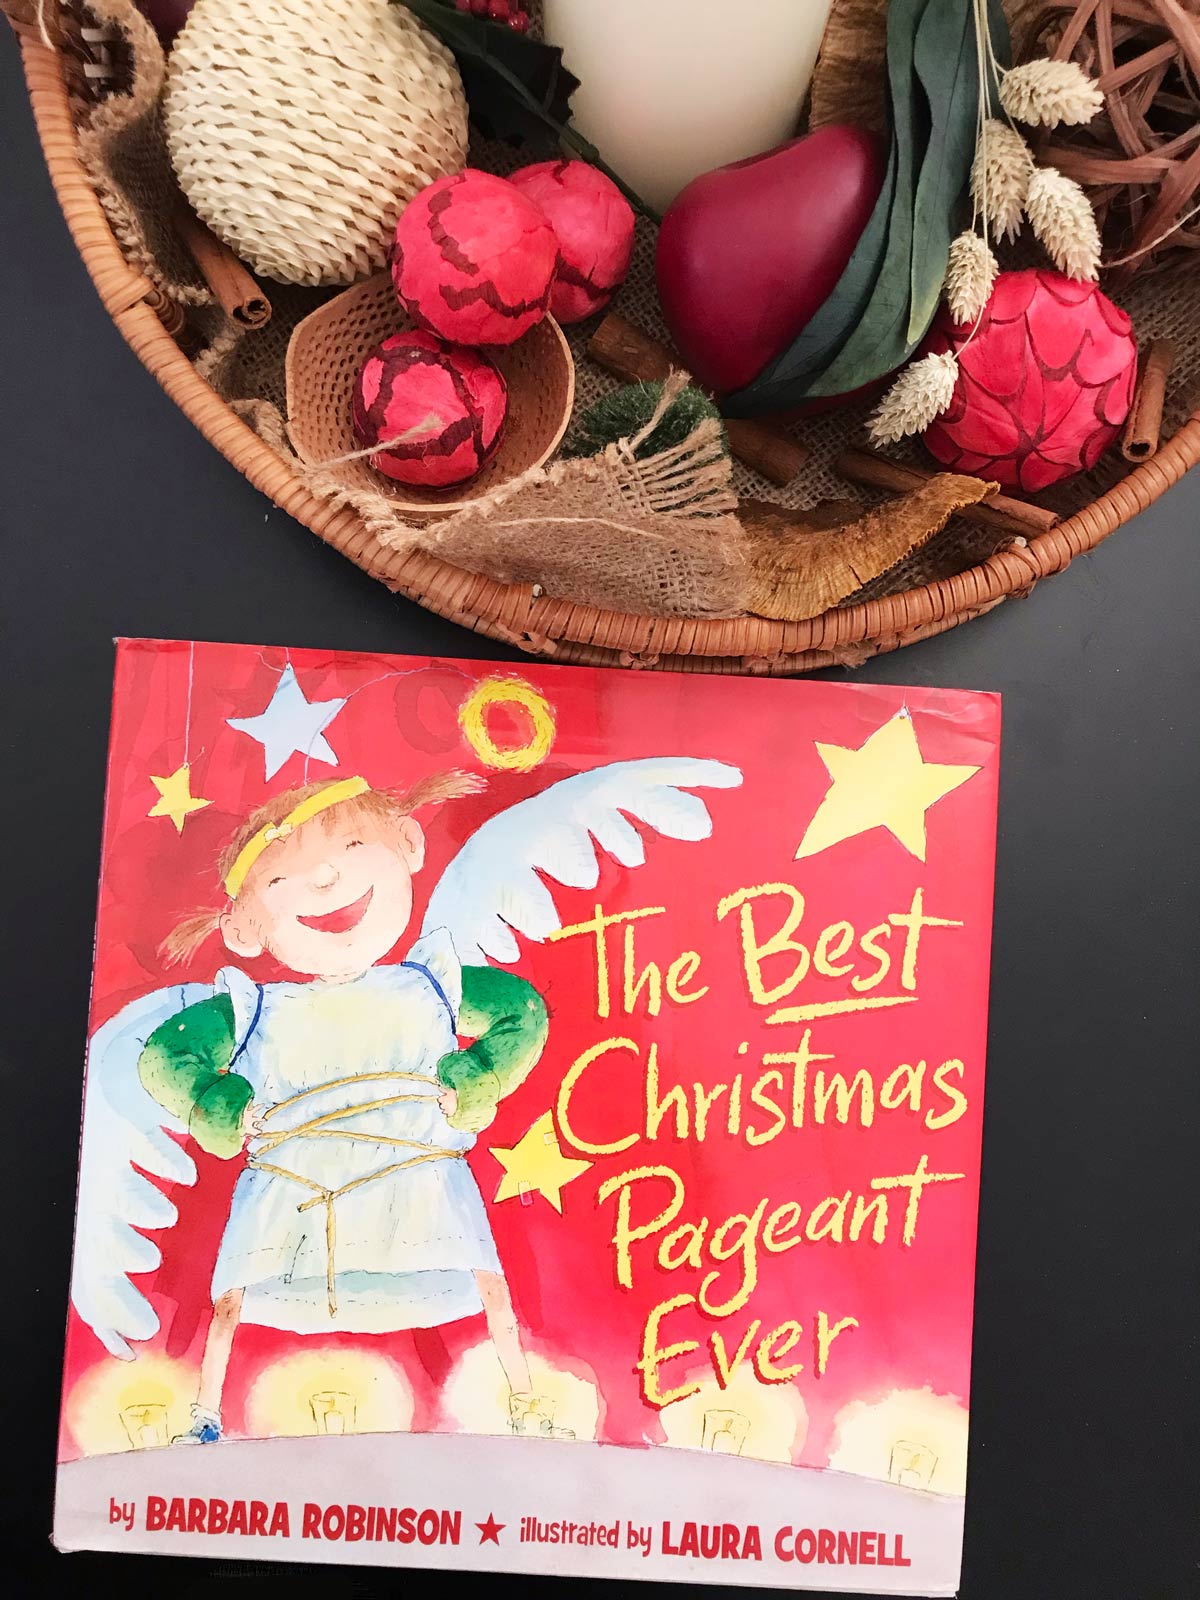 hard copy of best christmas pageant ever near basket of christmas decor.